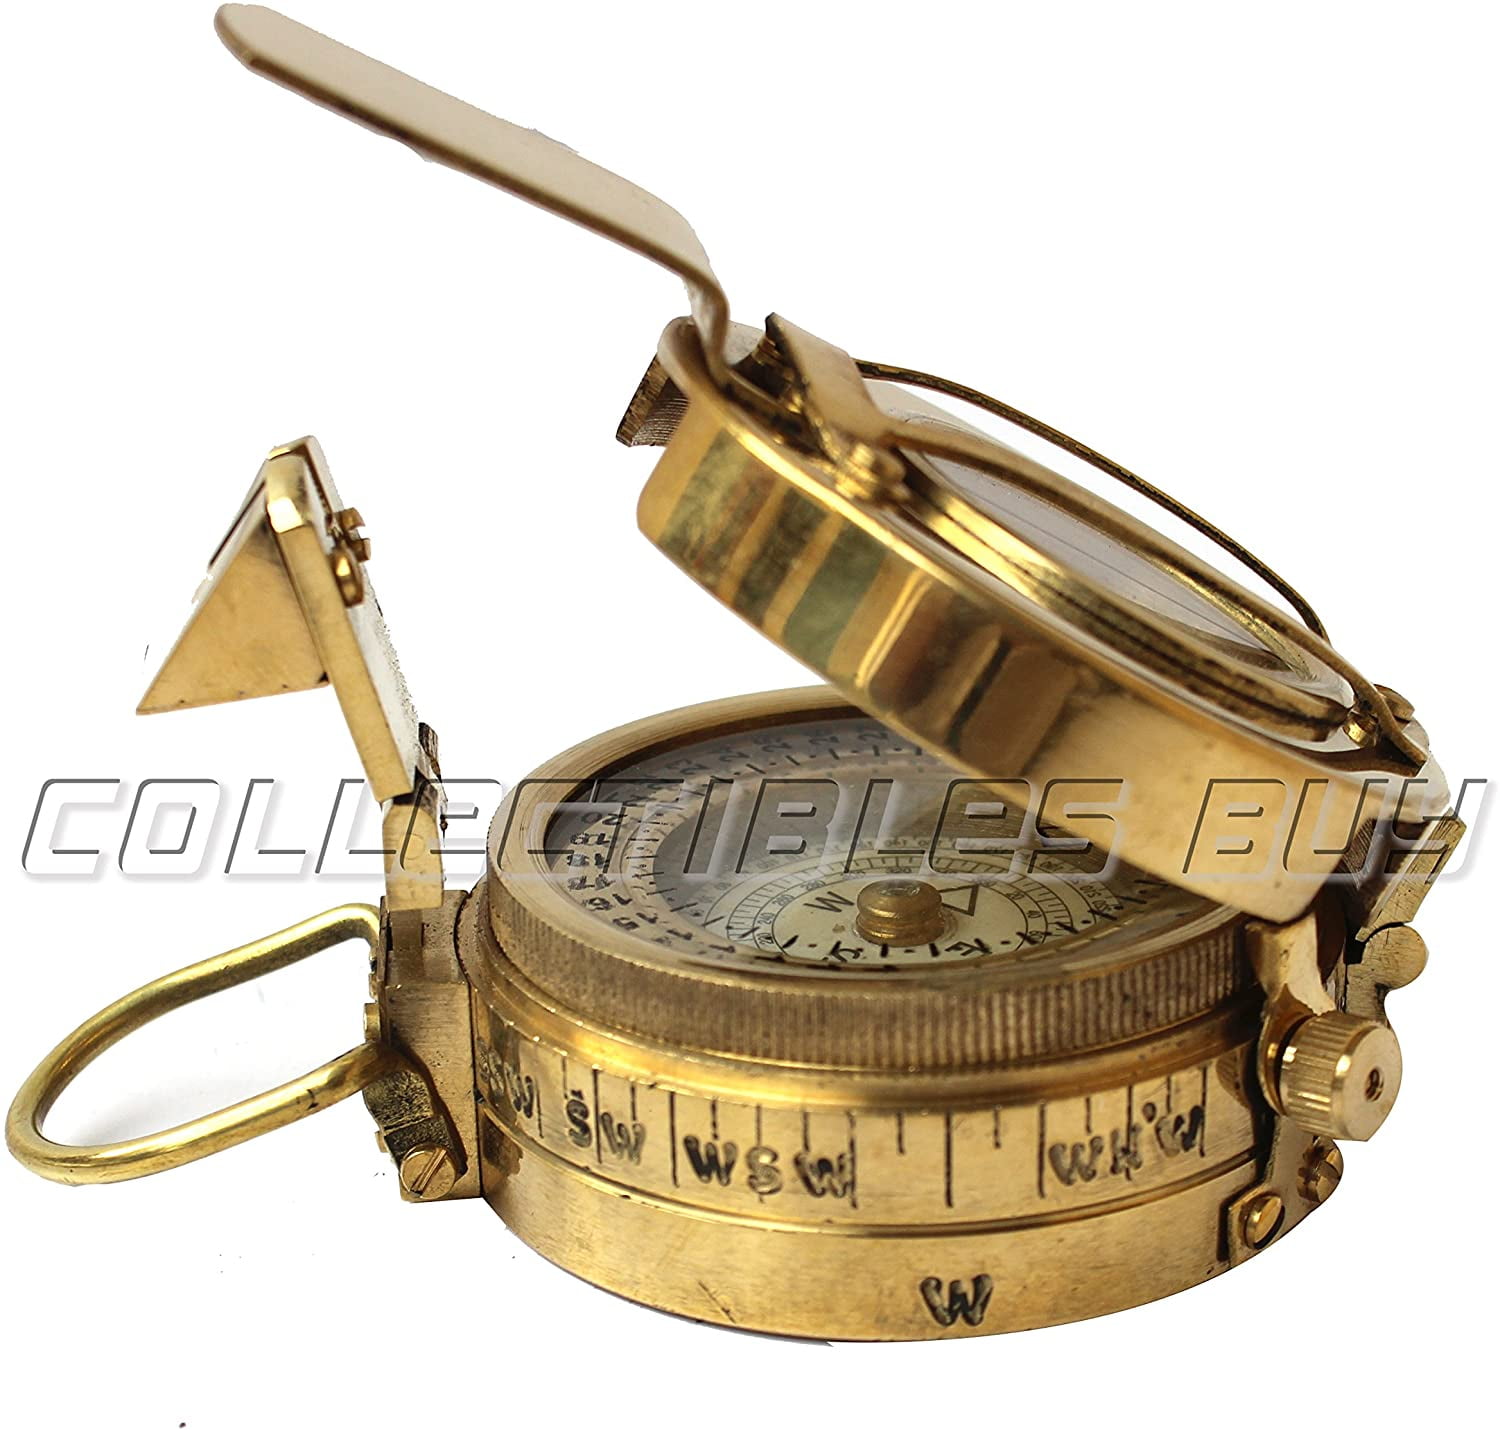 Antique Nautical Brass Military Compass Vintage Collectible Decor Style Gift 